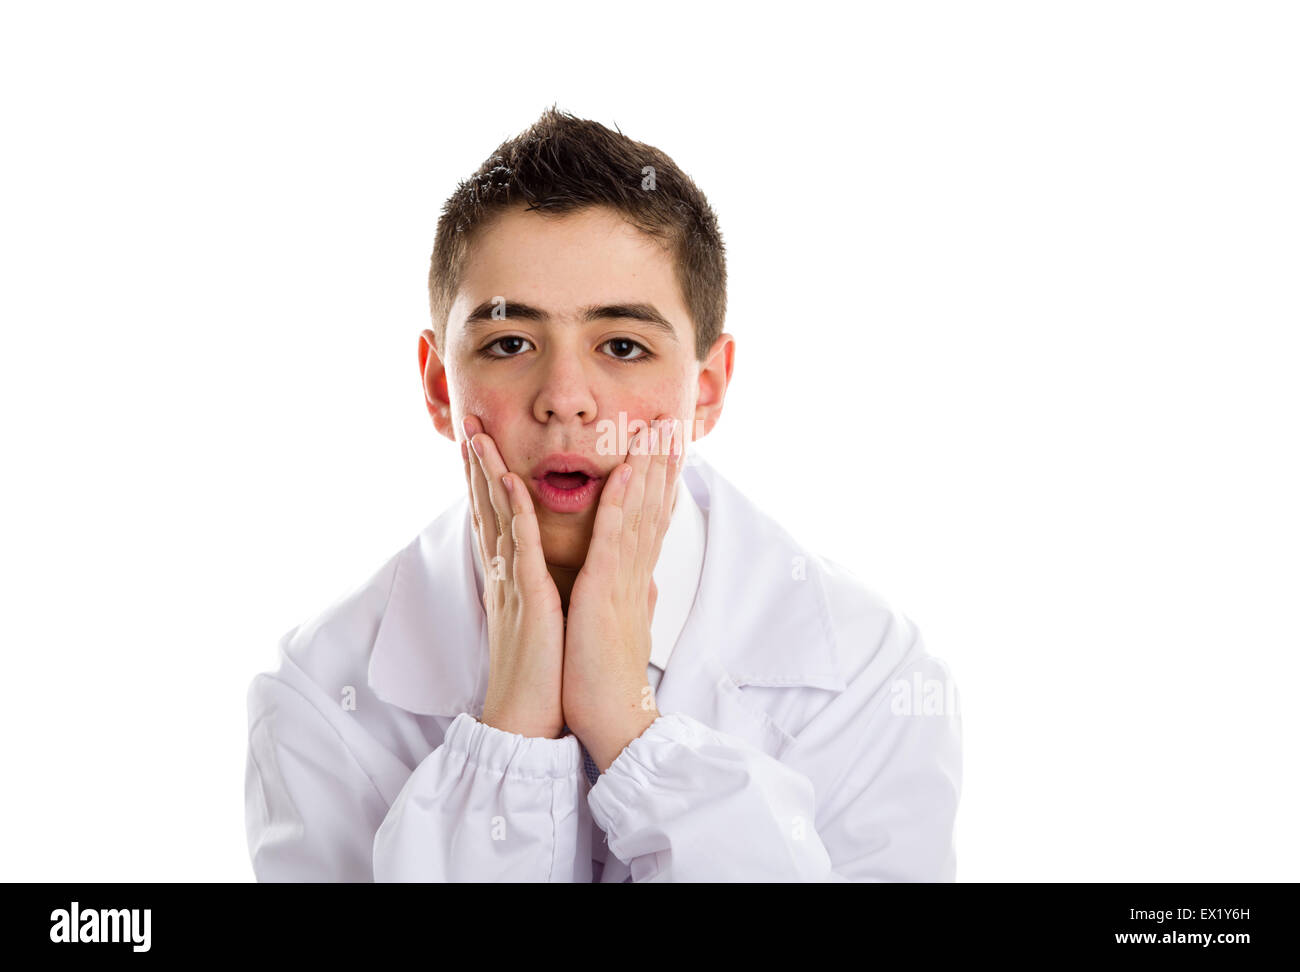 A boy doctor in white coat and blue tie helps to feel medicine more friendly: he is puzzled and holding his chin. His acne skin has not ben retouched Stock Photo